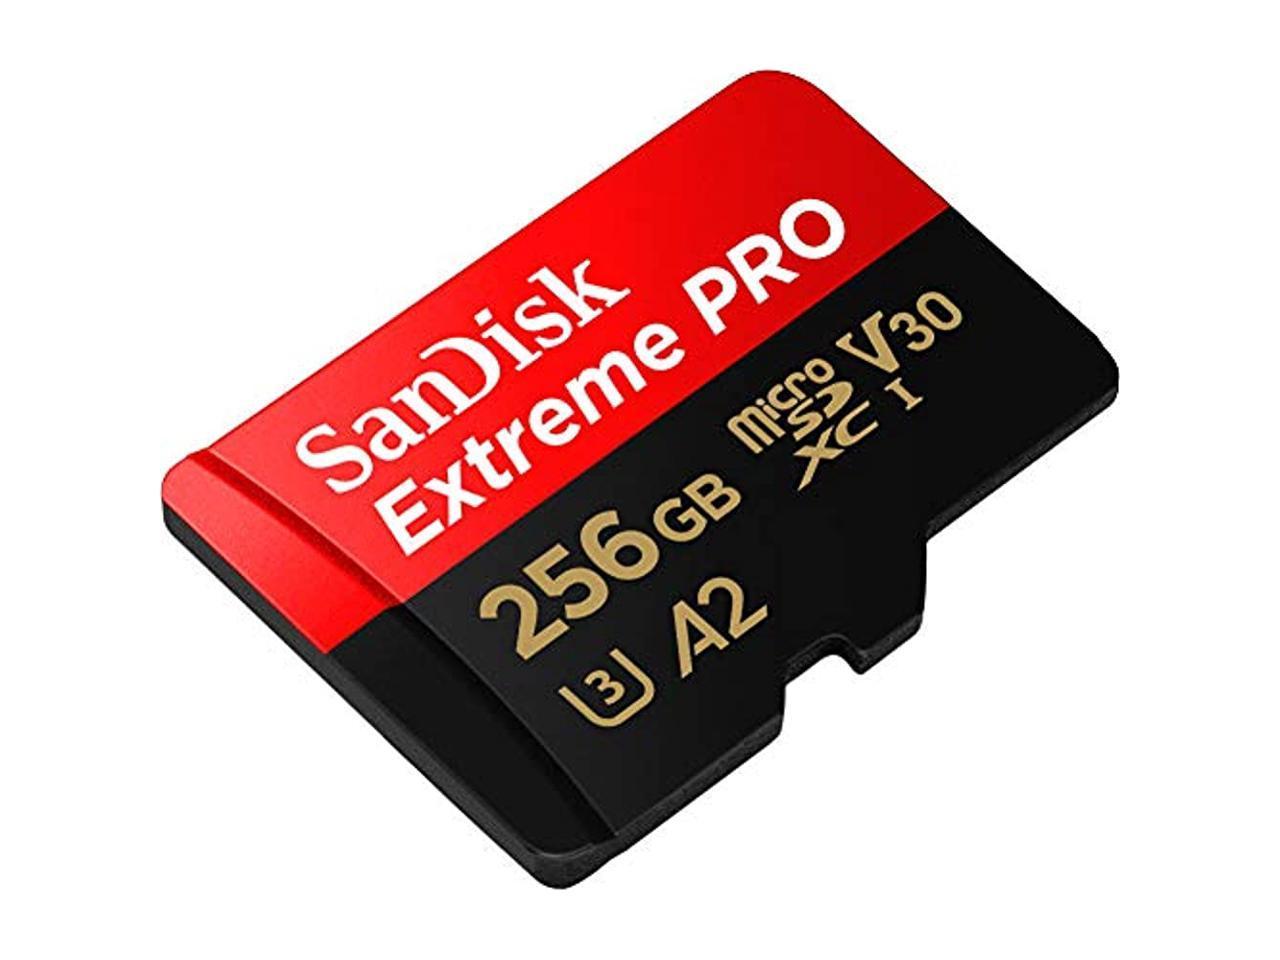 SANDISK 256GB TF CL10 EXTREME PRO